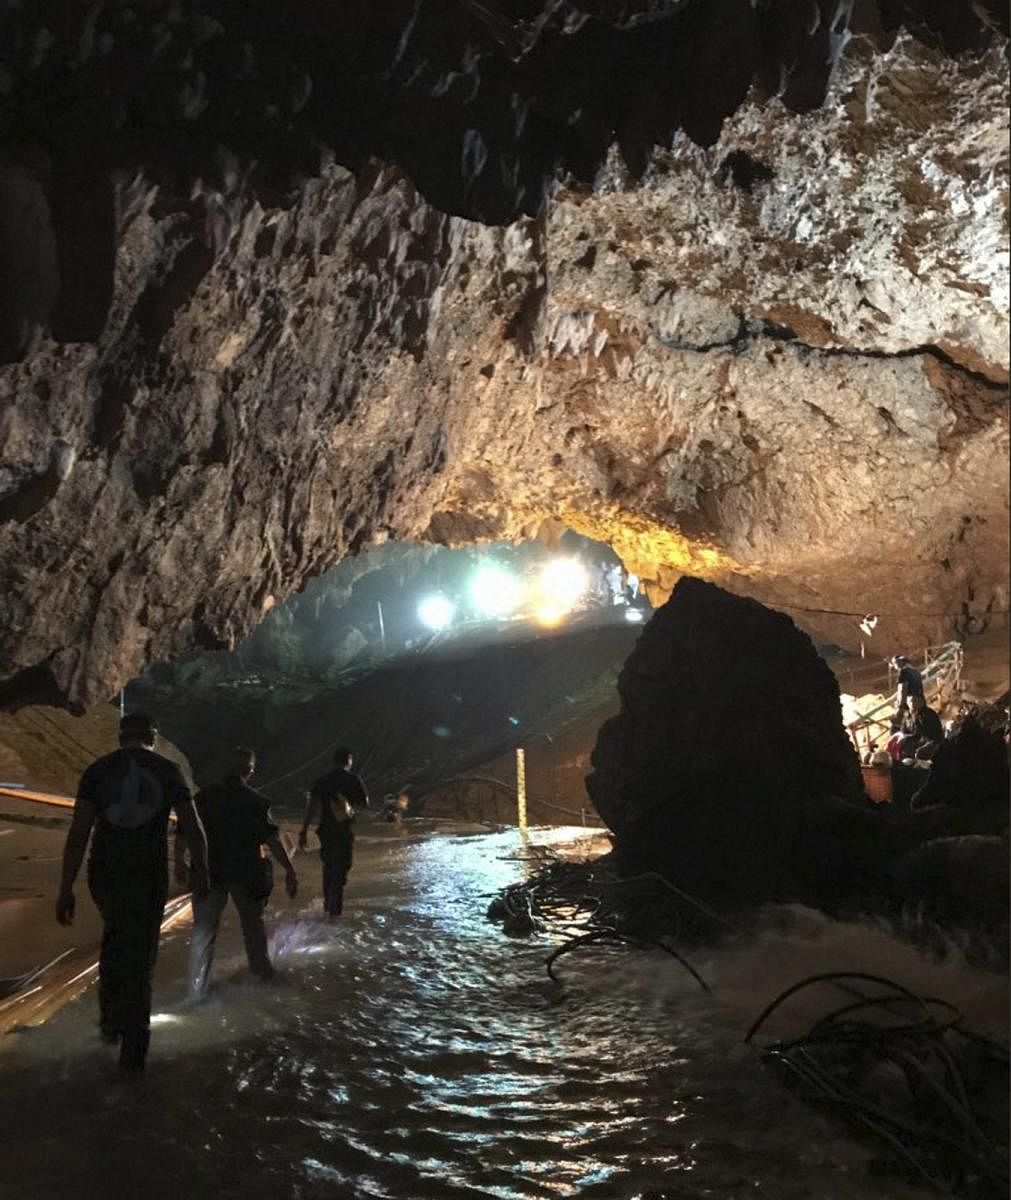 The image shows efforts underway to rescue trapped members of a youth soccer team from a flooded cave in northern Thailand. AP/PTI Photo